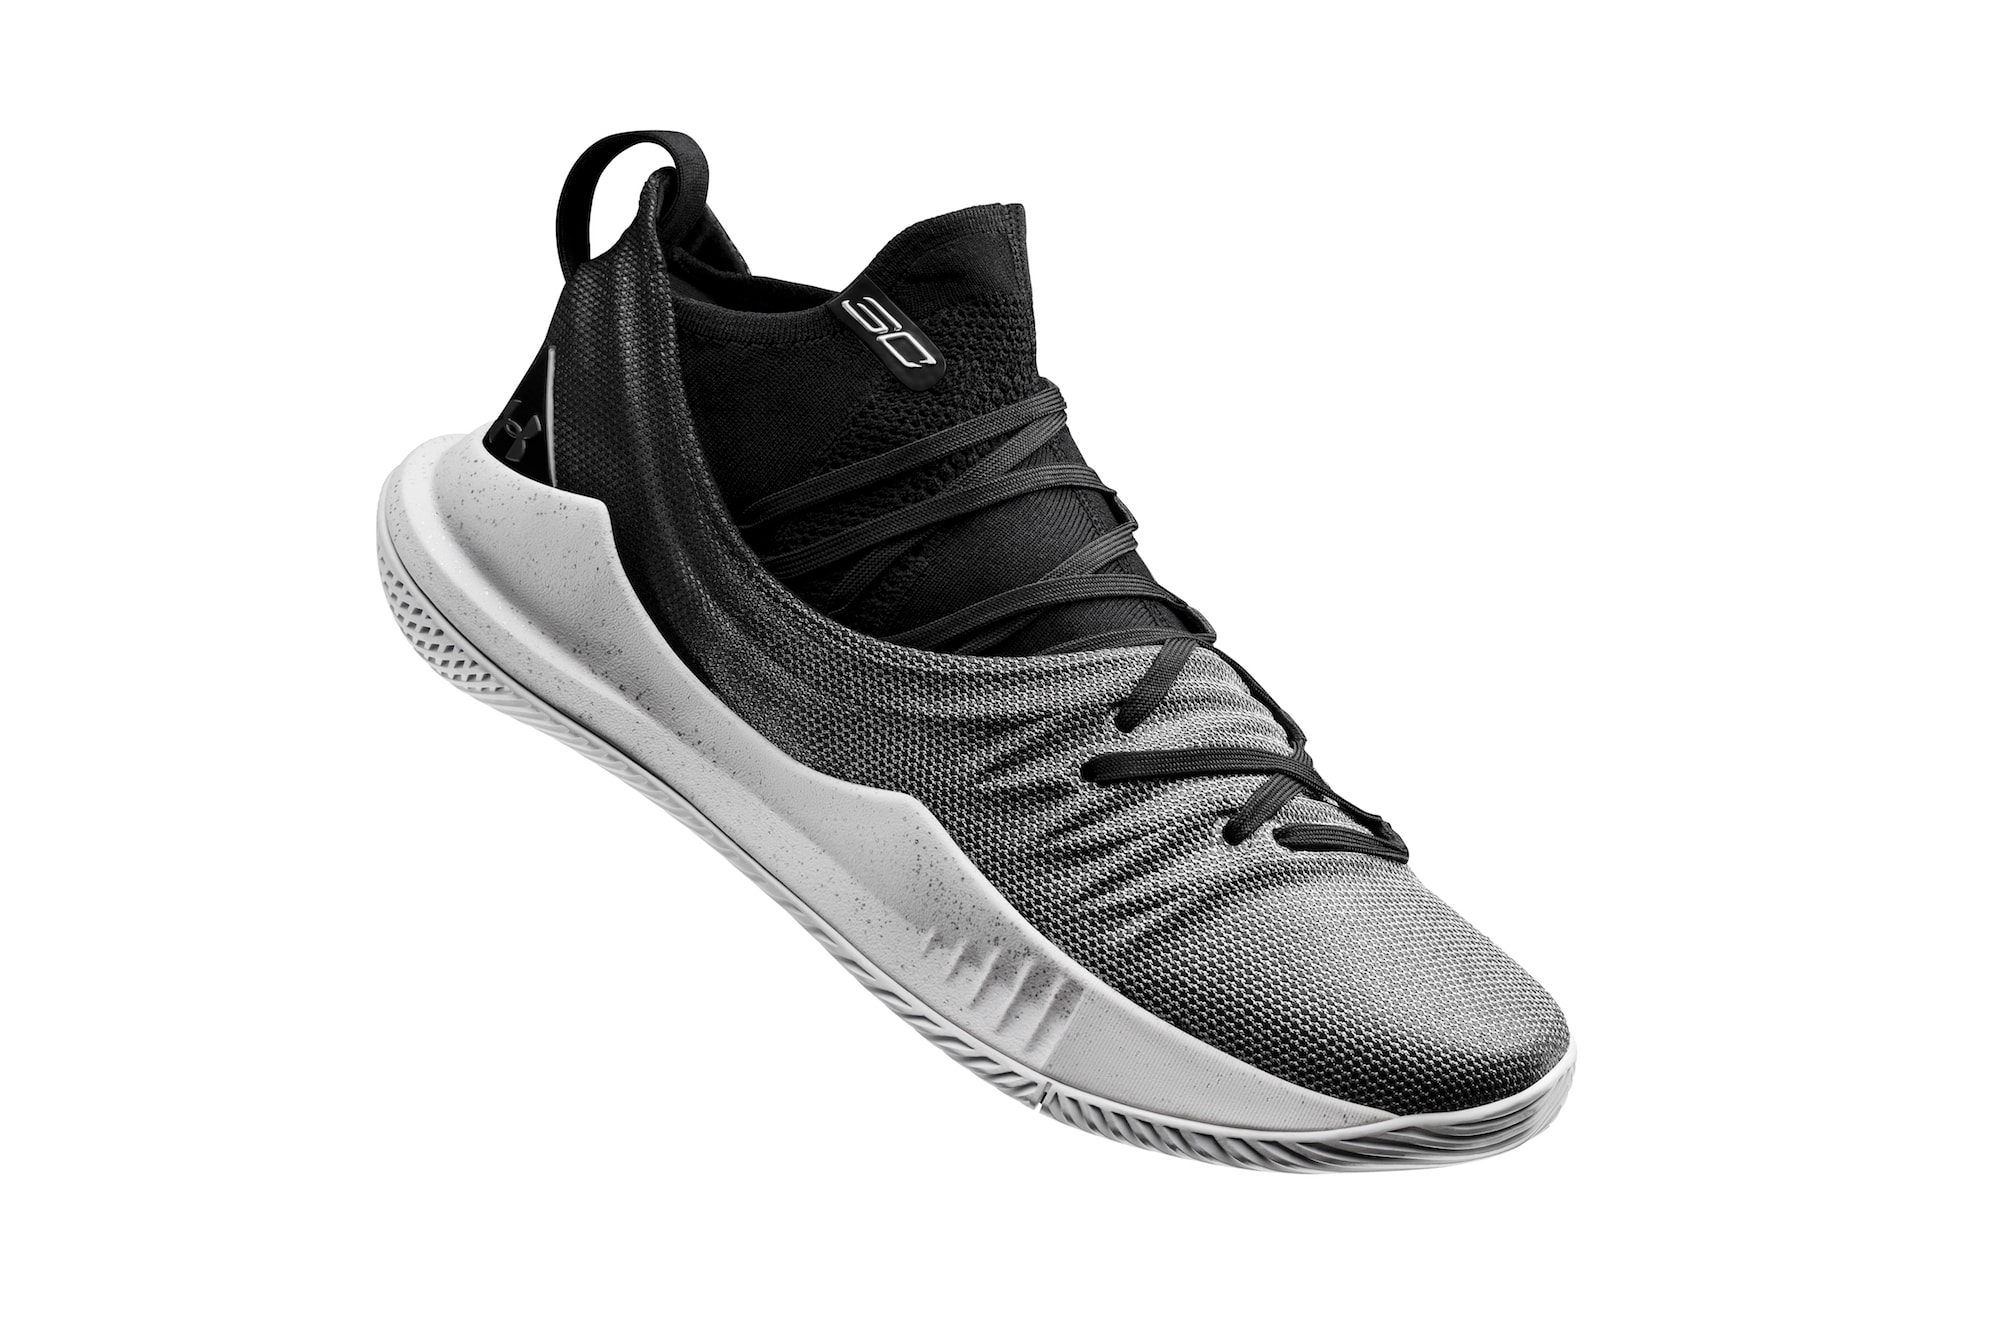 Under Armour Curry 5 全新黑白配色登場